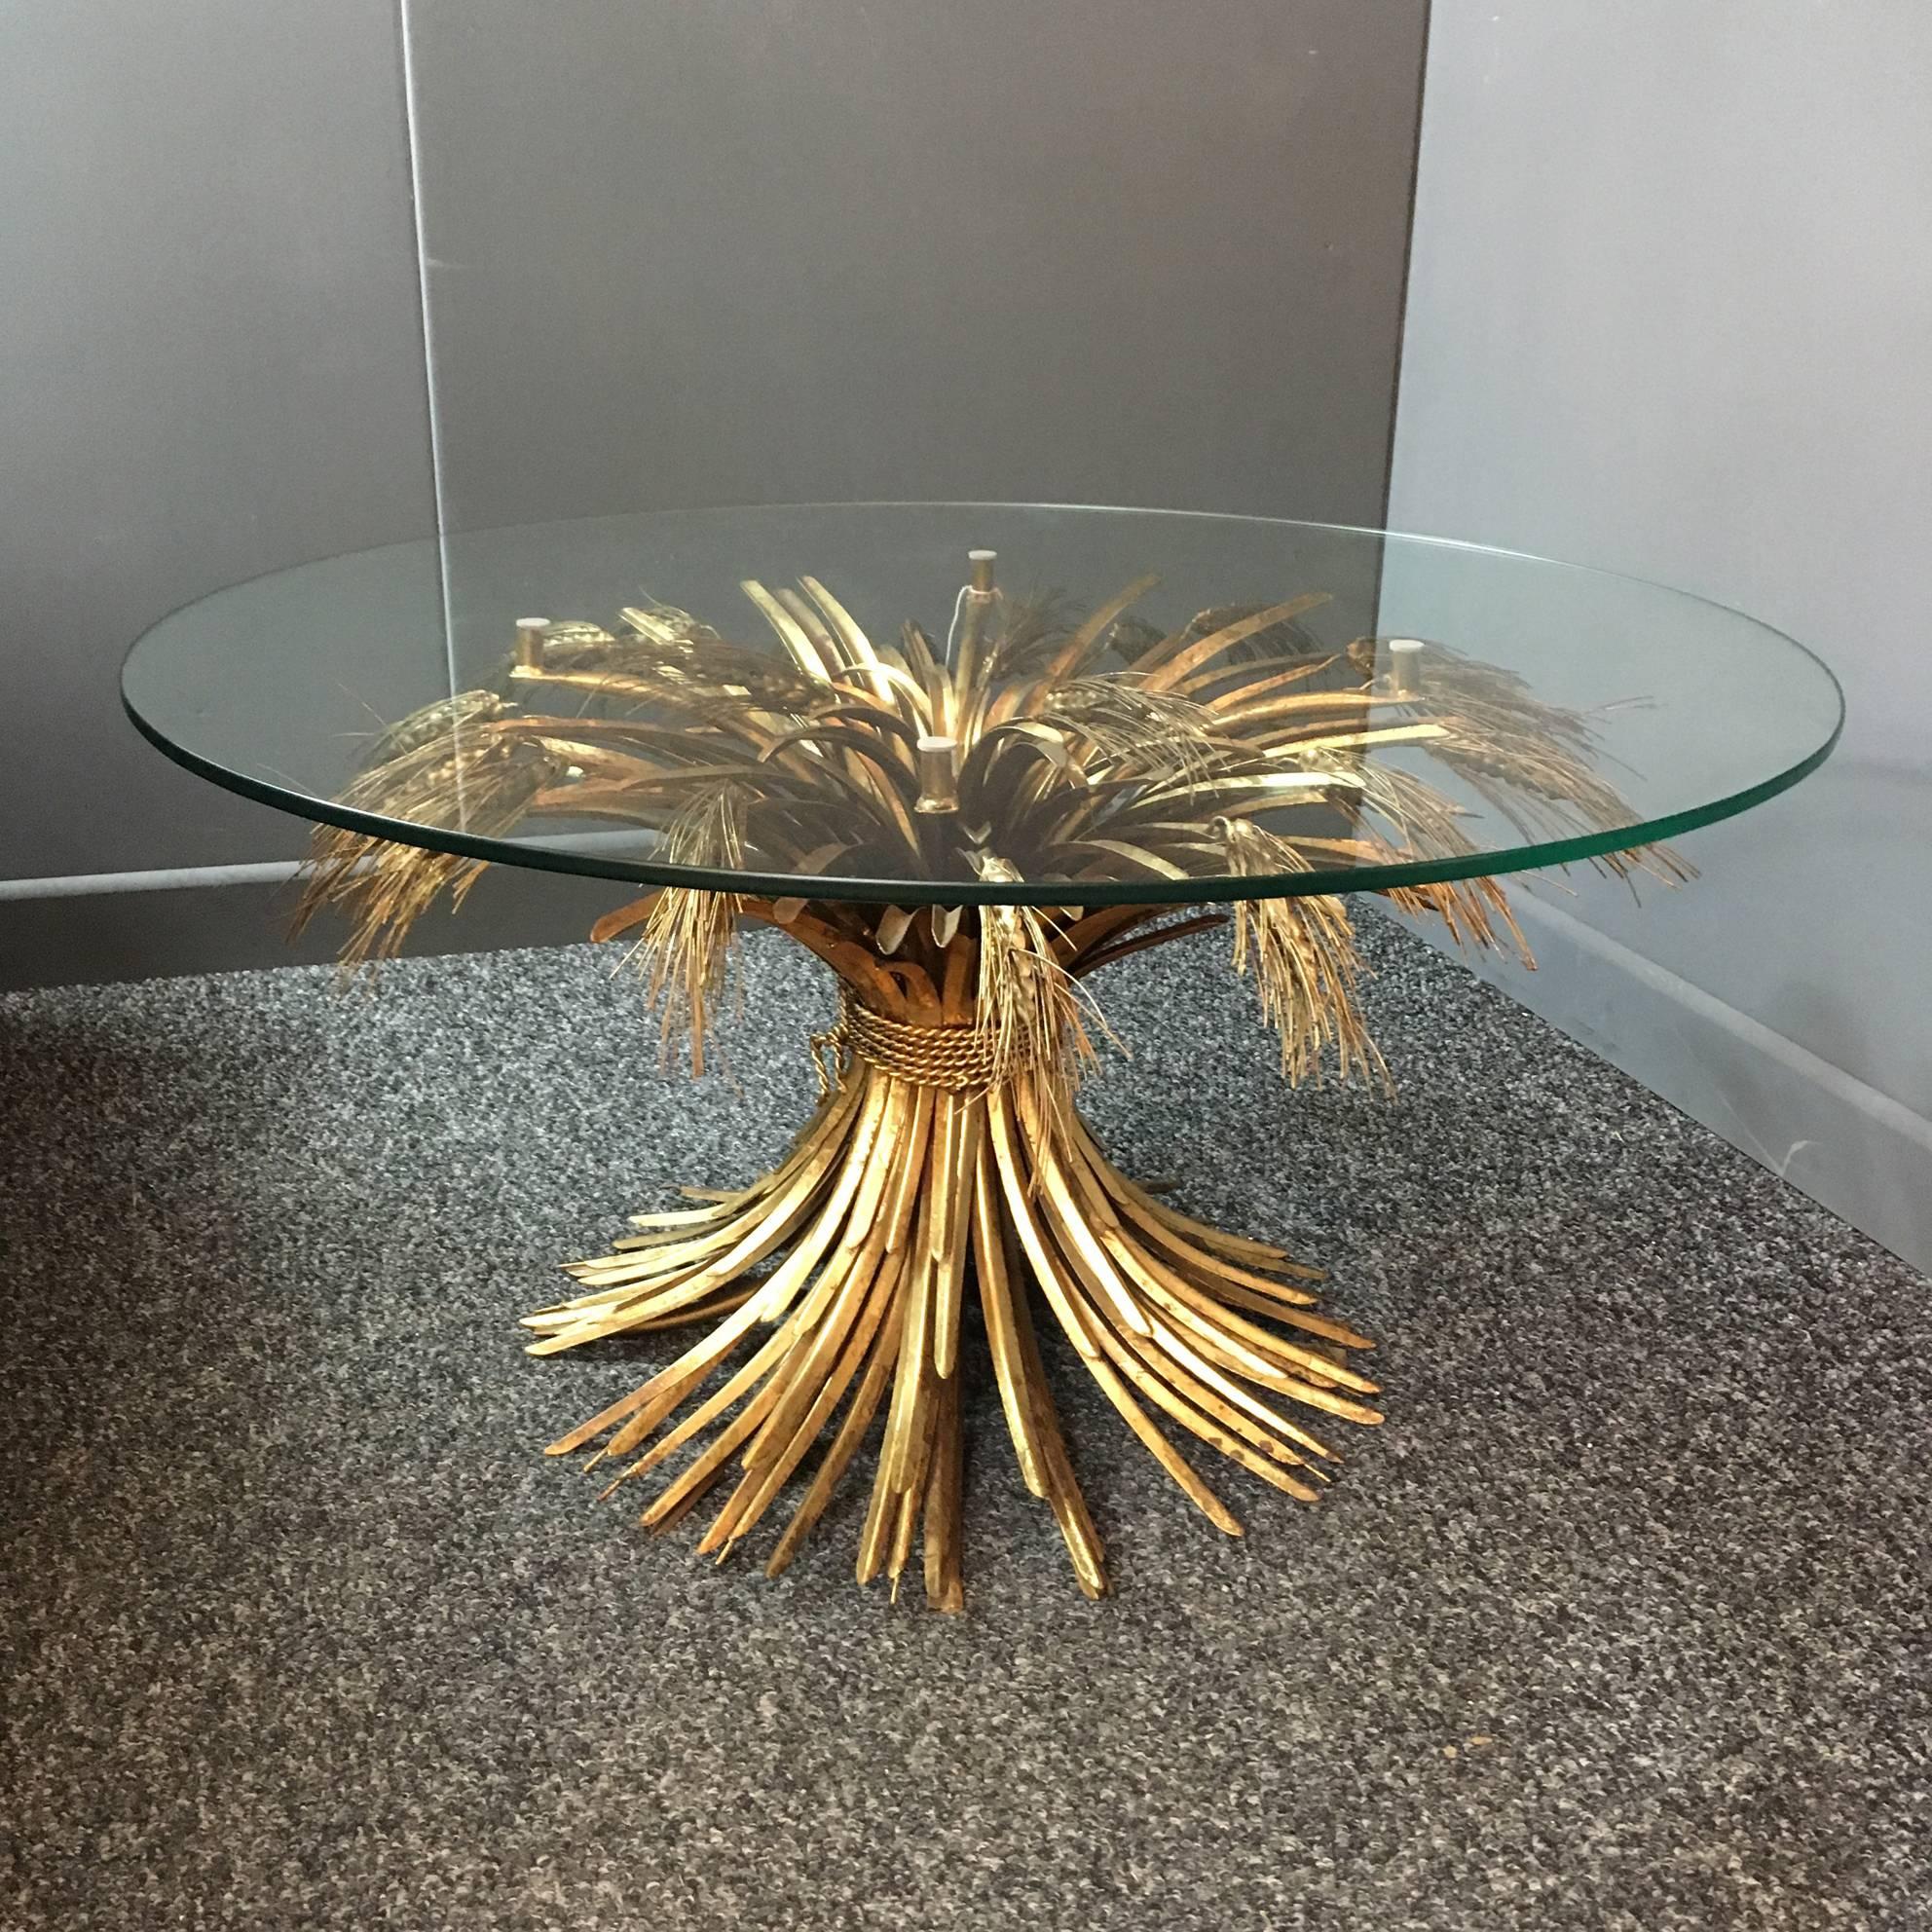 Midcentury gilt brass wheat sheaf table

Stunning example of a wheat sheaf table,

circa 1950s-1970s.

Italian or French origin.

Large size and very thick leaf and stem base

The wheat sheaf heads are large and thick

The stems and